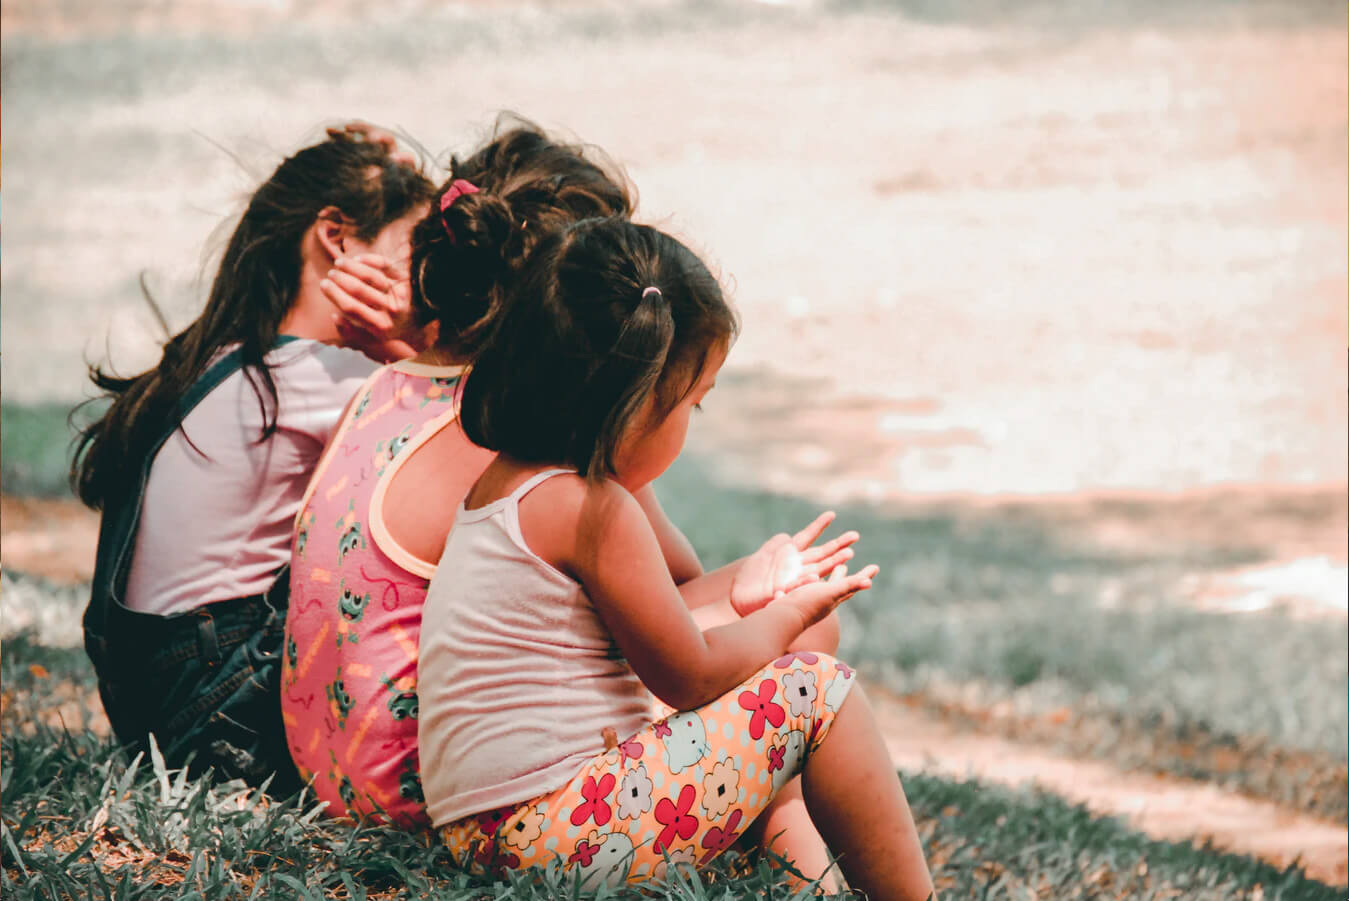 Three little girls sitting together on a grassy bank.